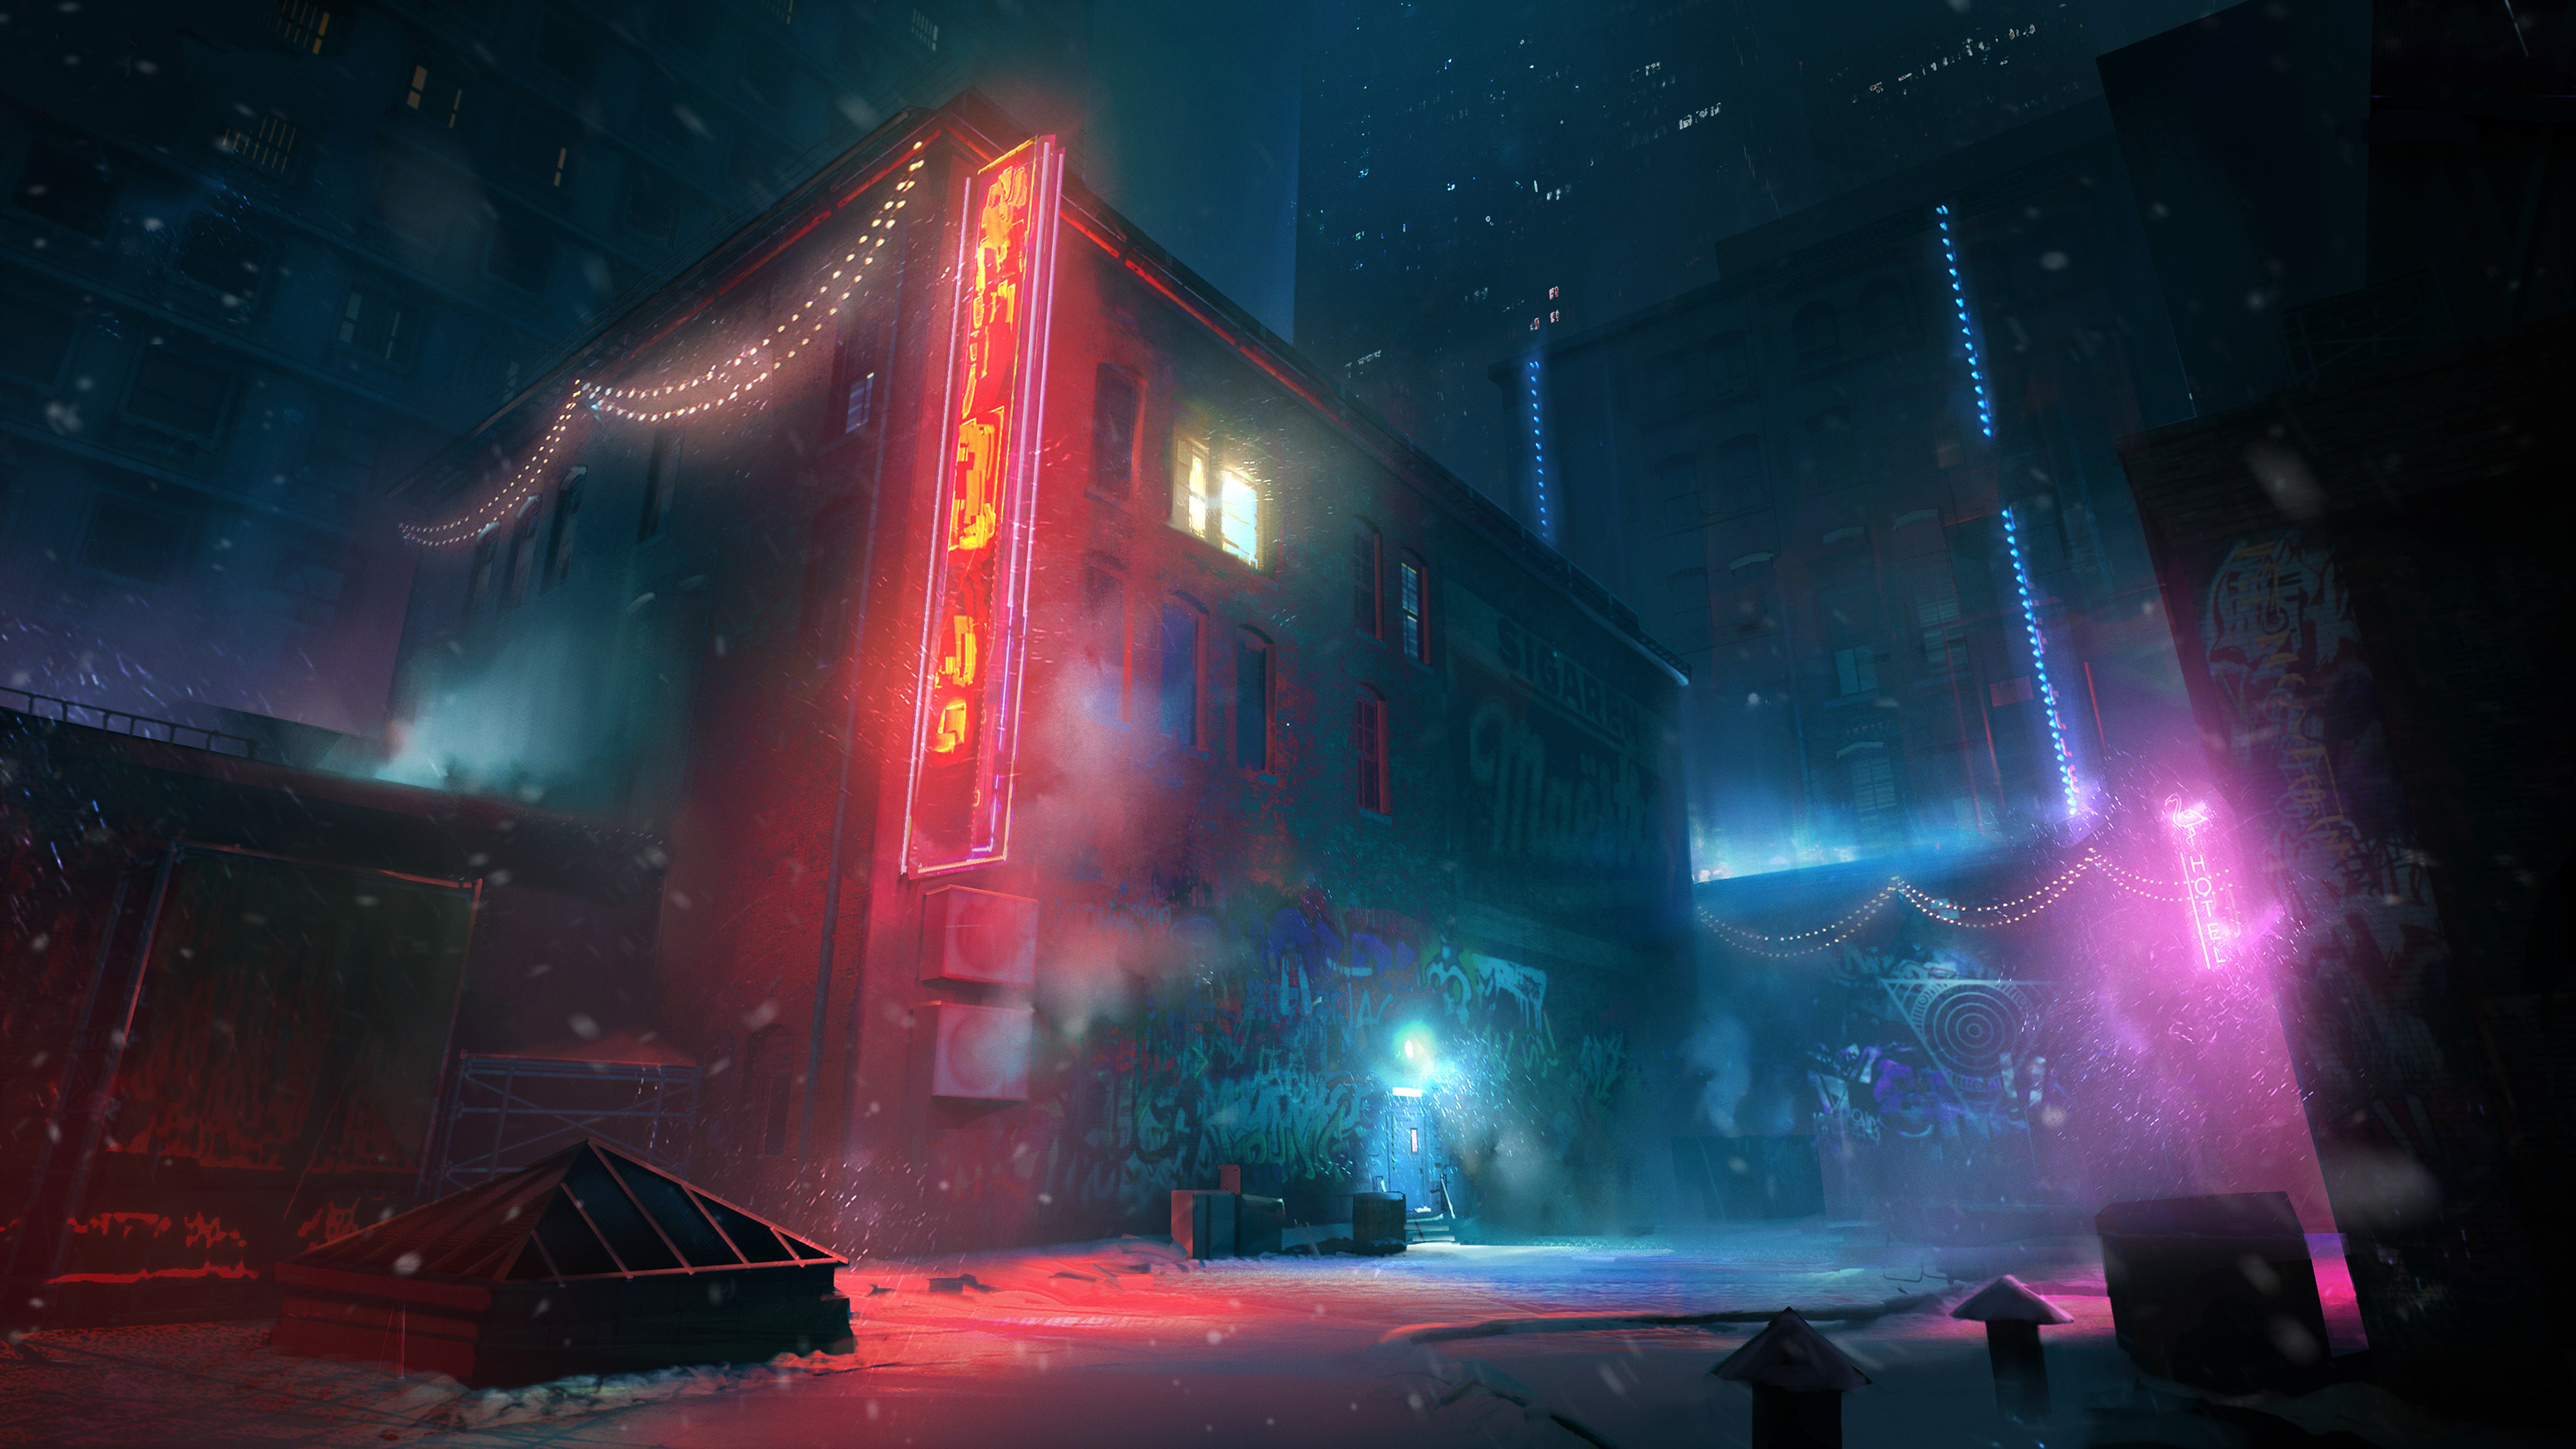 concept art of dive bar in the snow